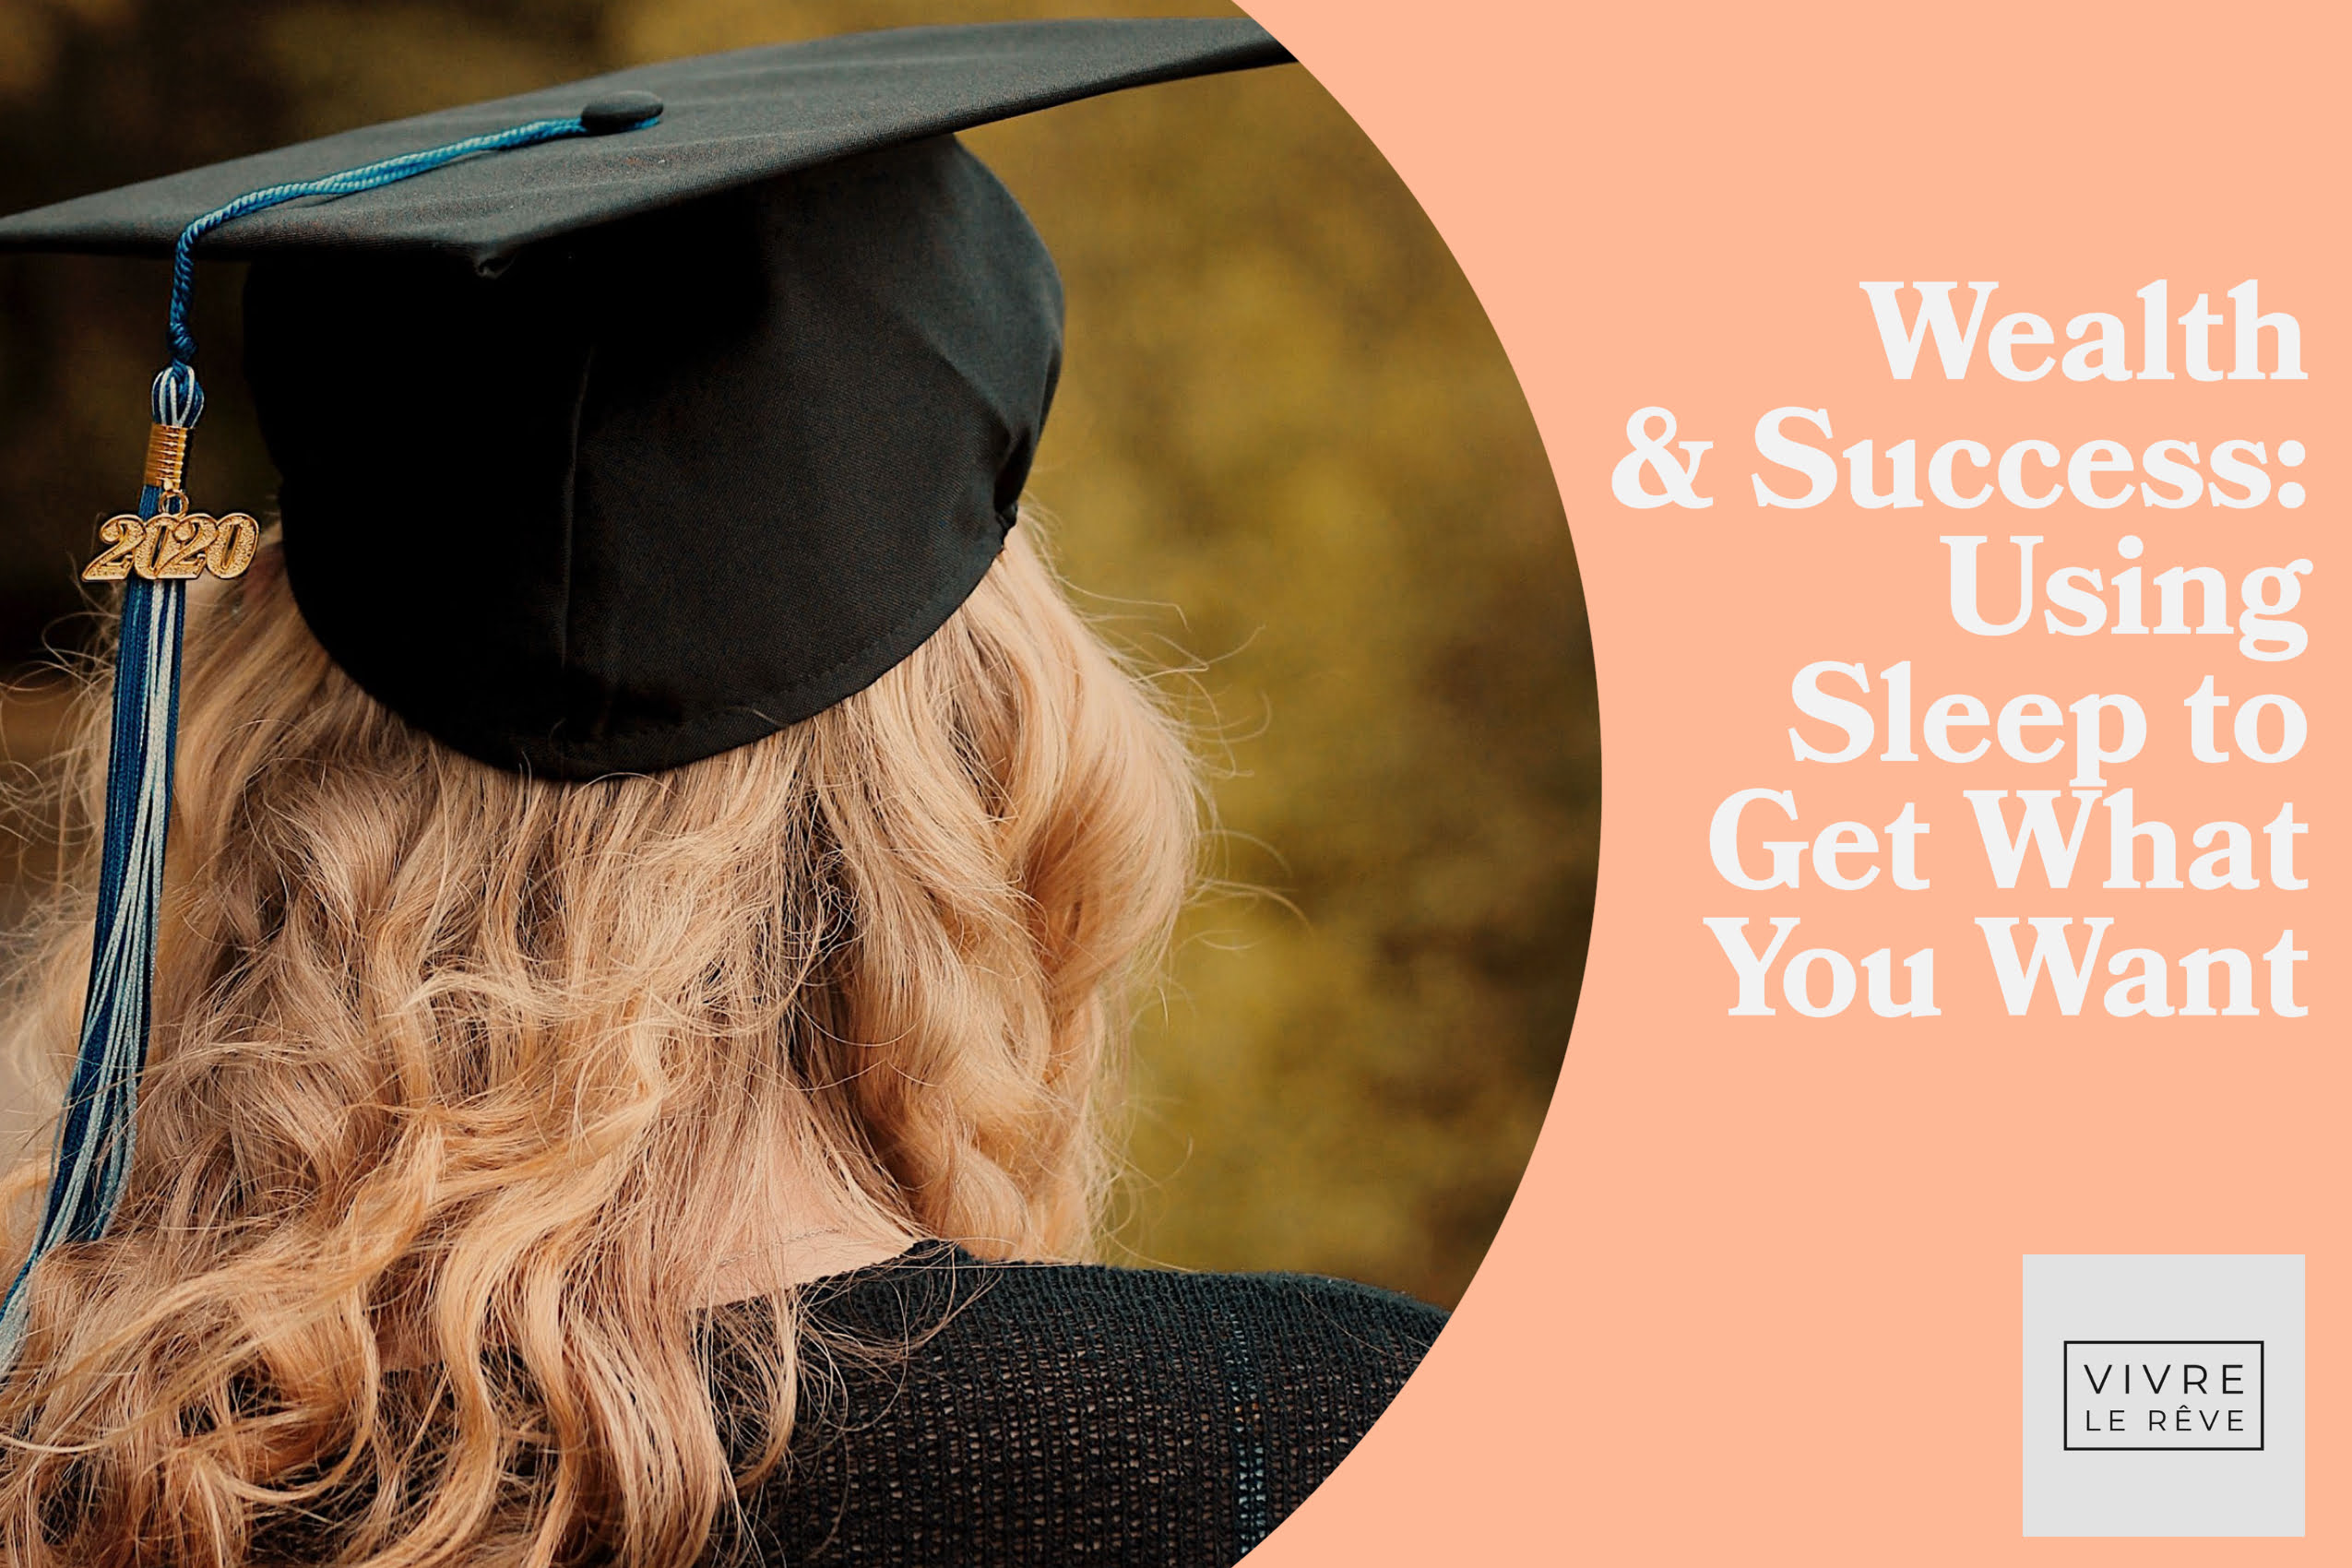 Wealth & Success: Using Sleep to Get What You Want